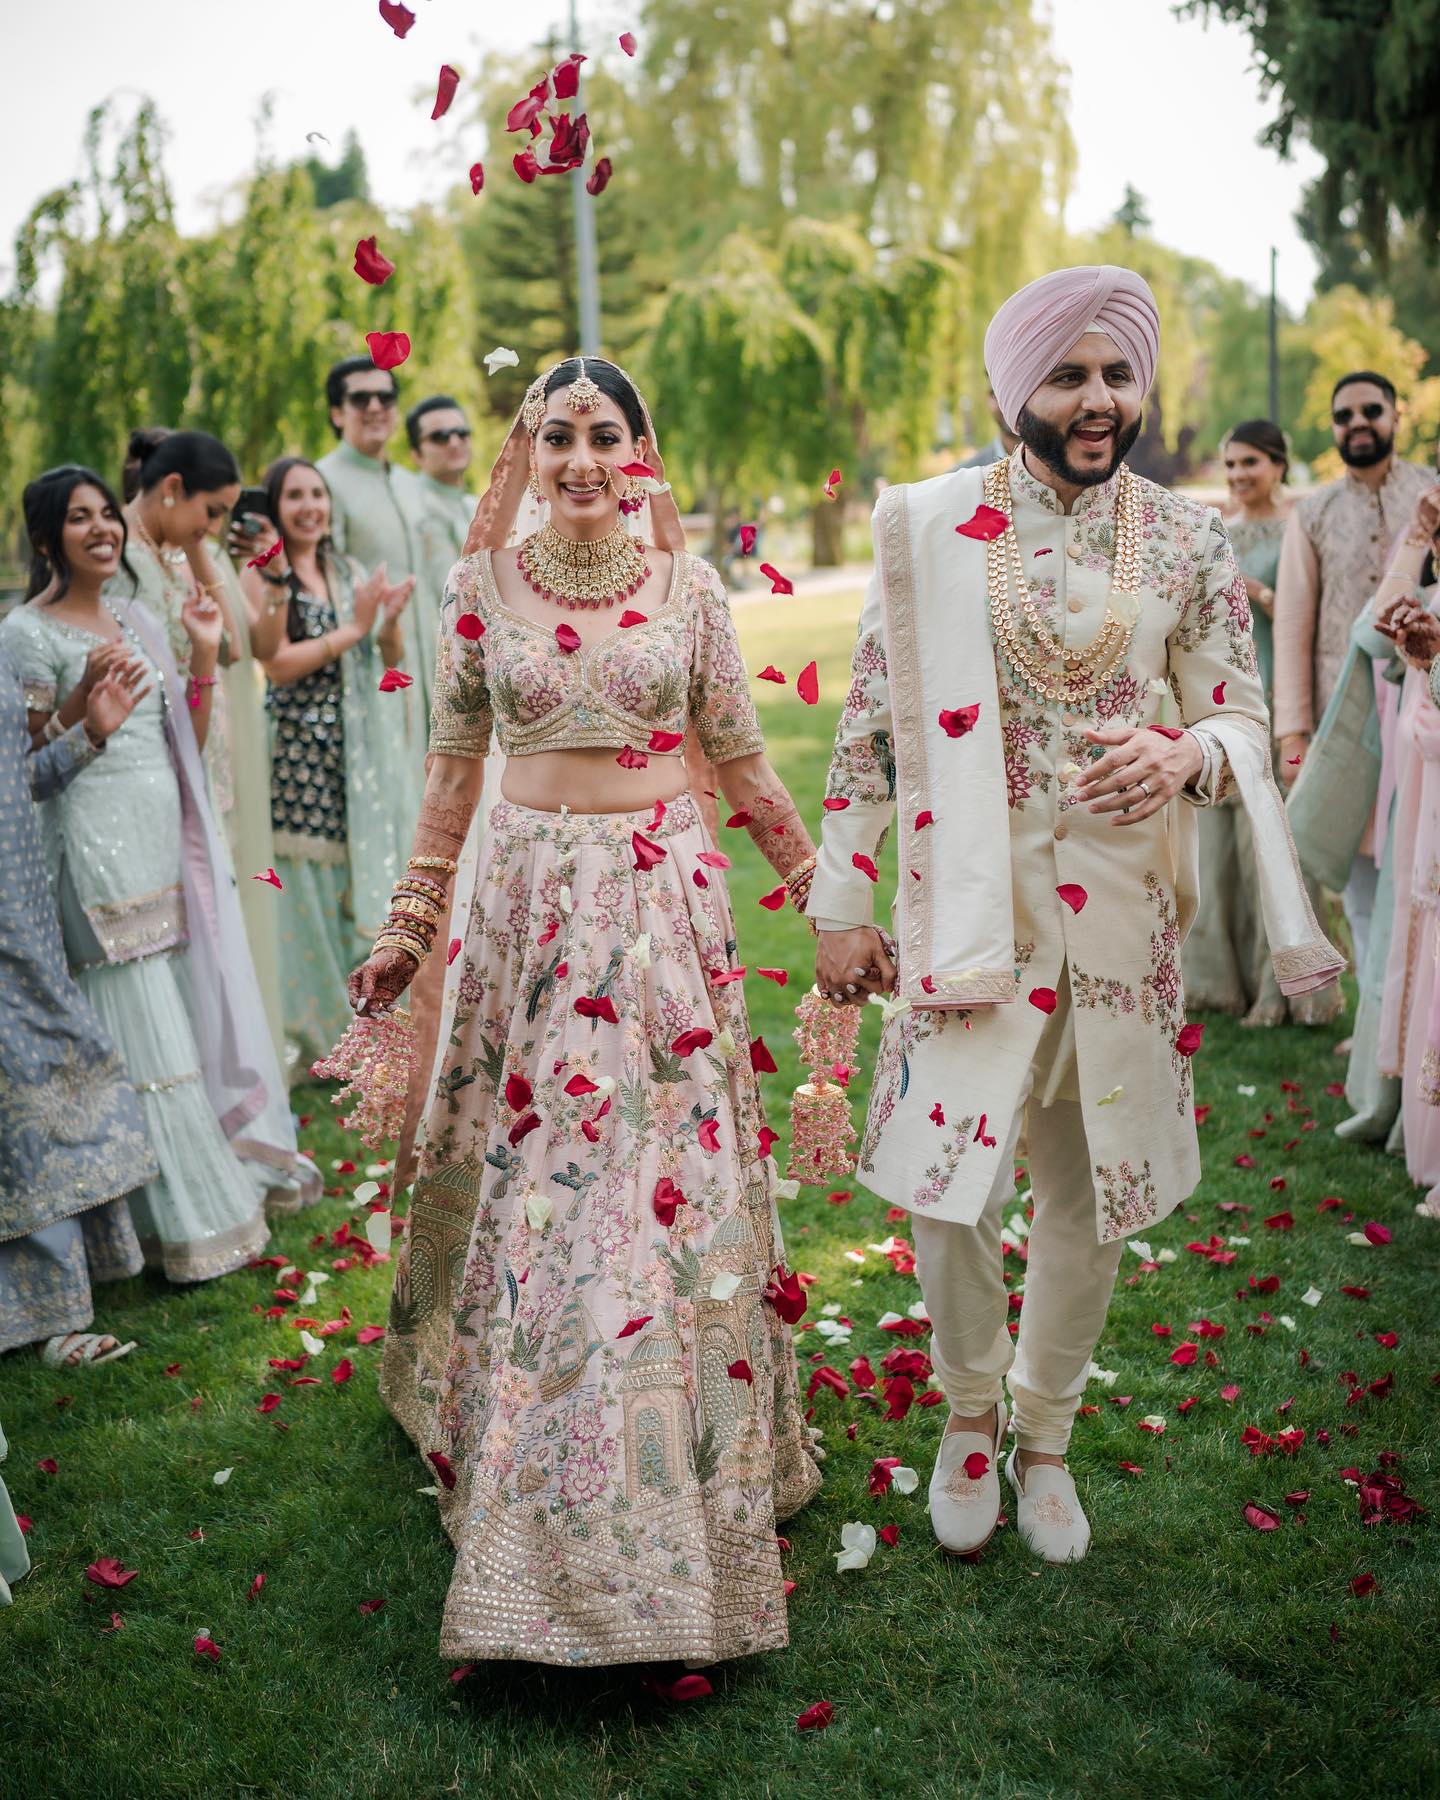 Producer Producer Aman Gill Gets Married To Amrit Berar In A Sikh Wedding